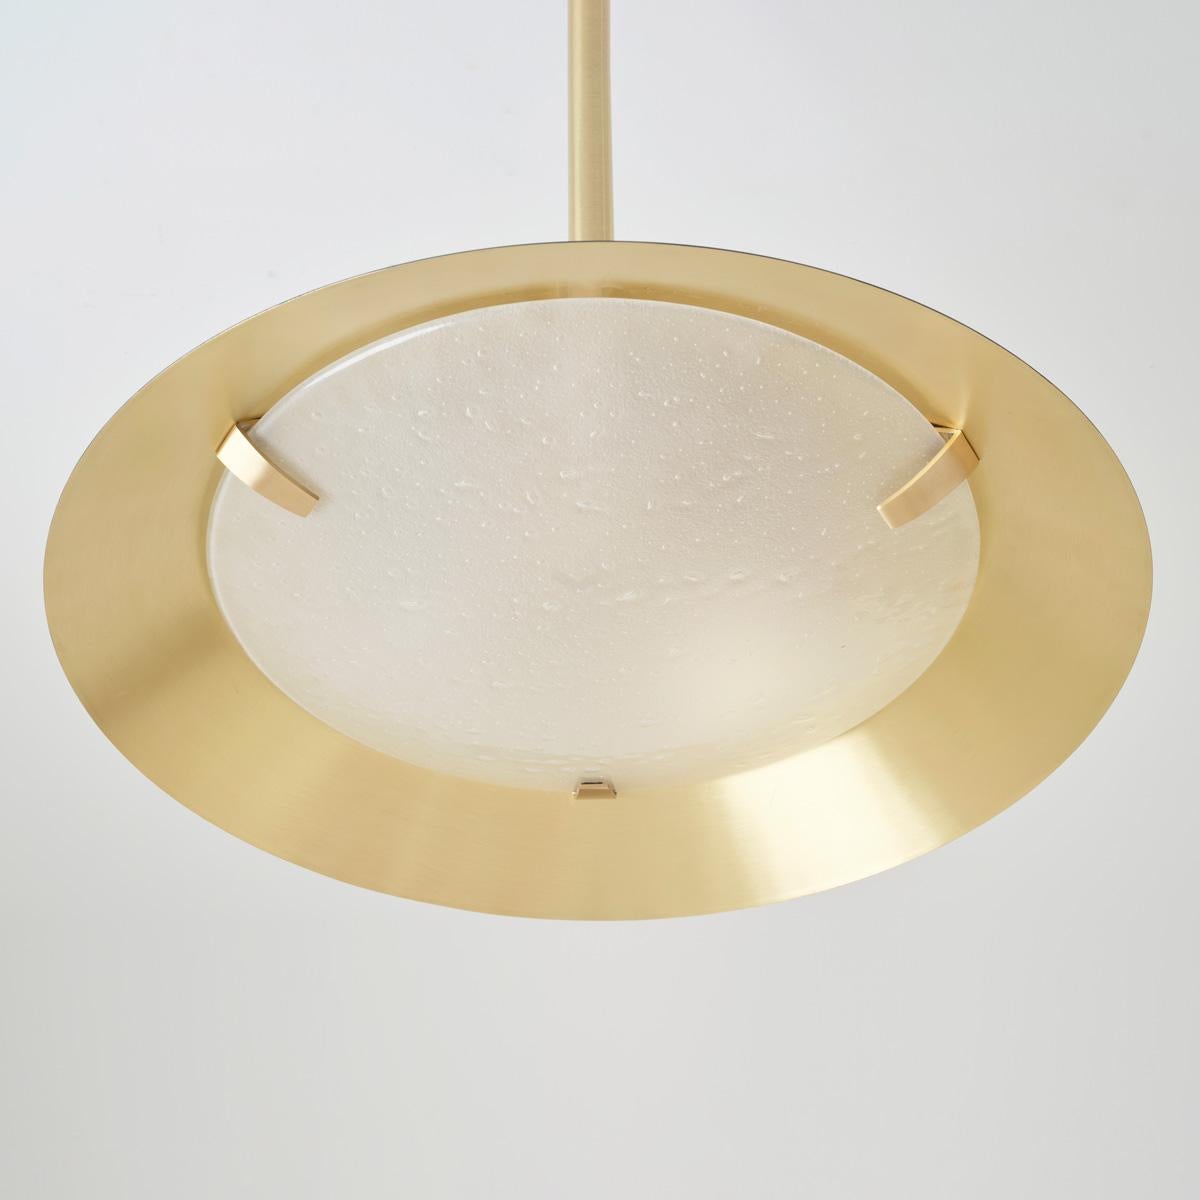 Kono Pendant by Gaspare Asaro. Satin Brass and Bronze In New Condition For Sale In New York, NY